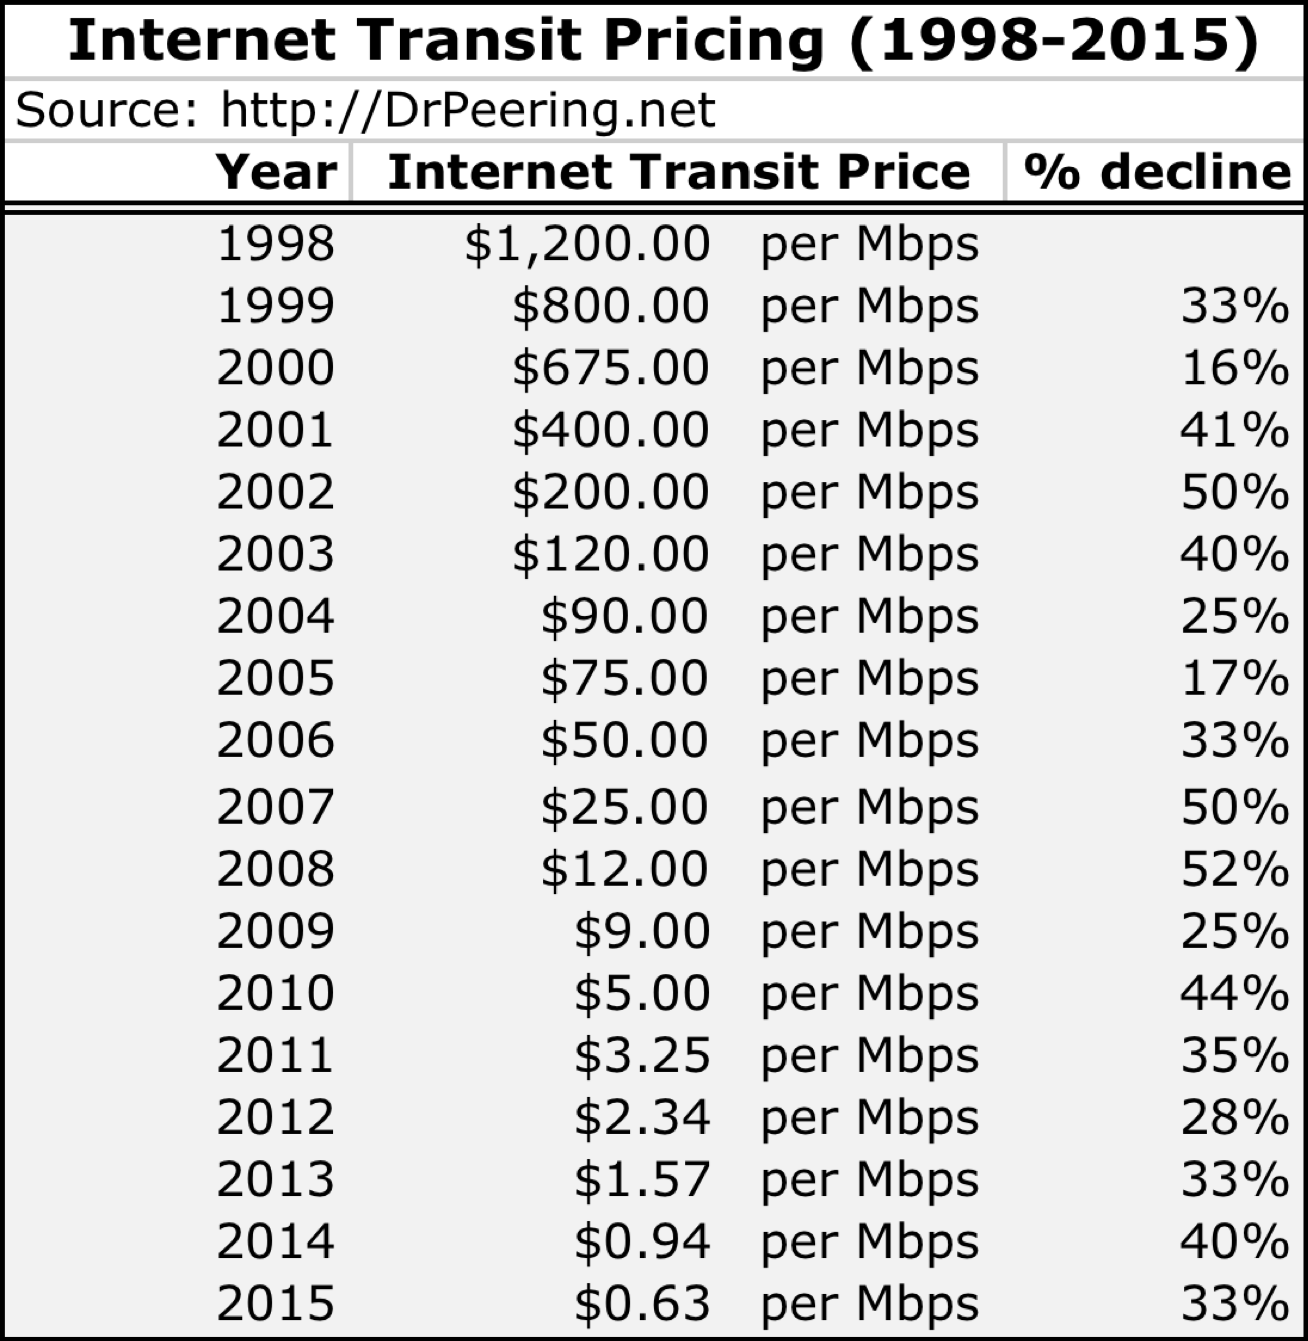 What are transit pricing trends?